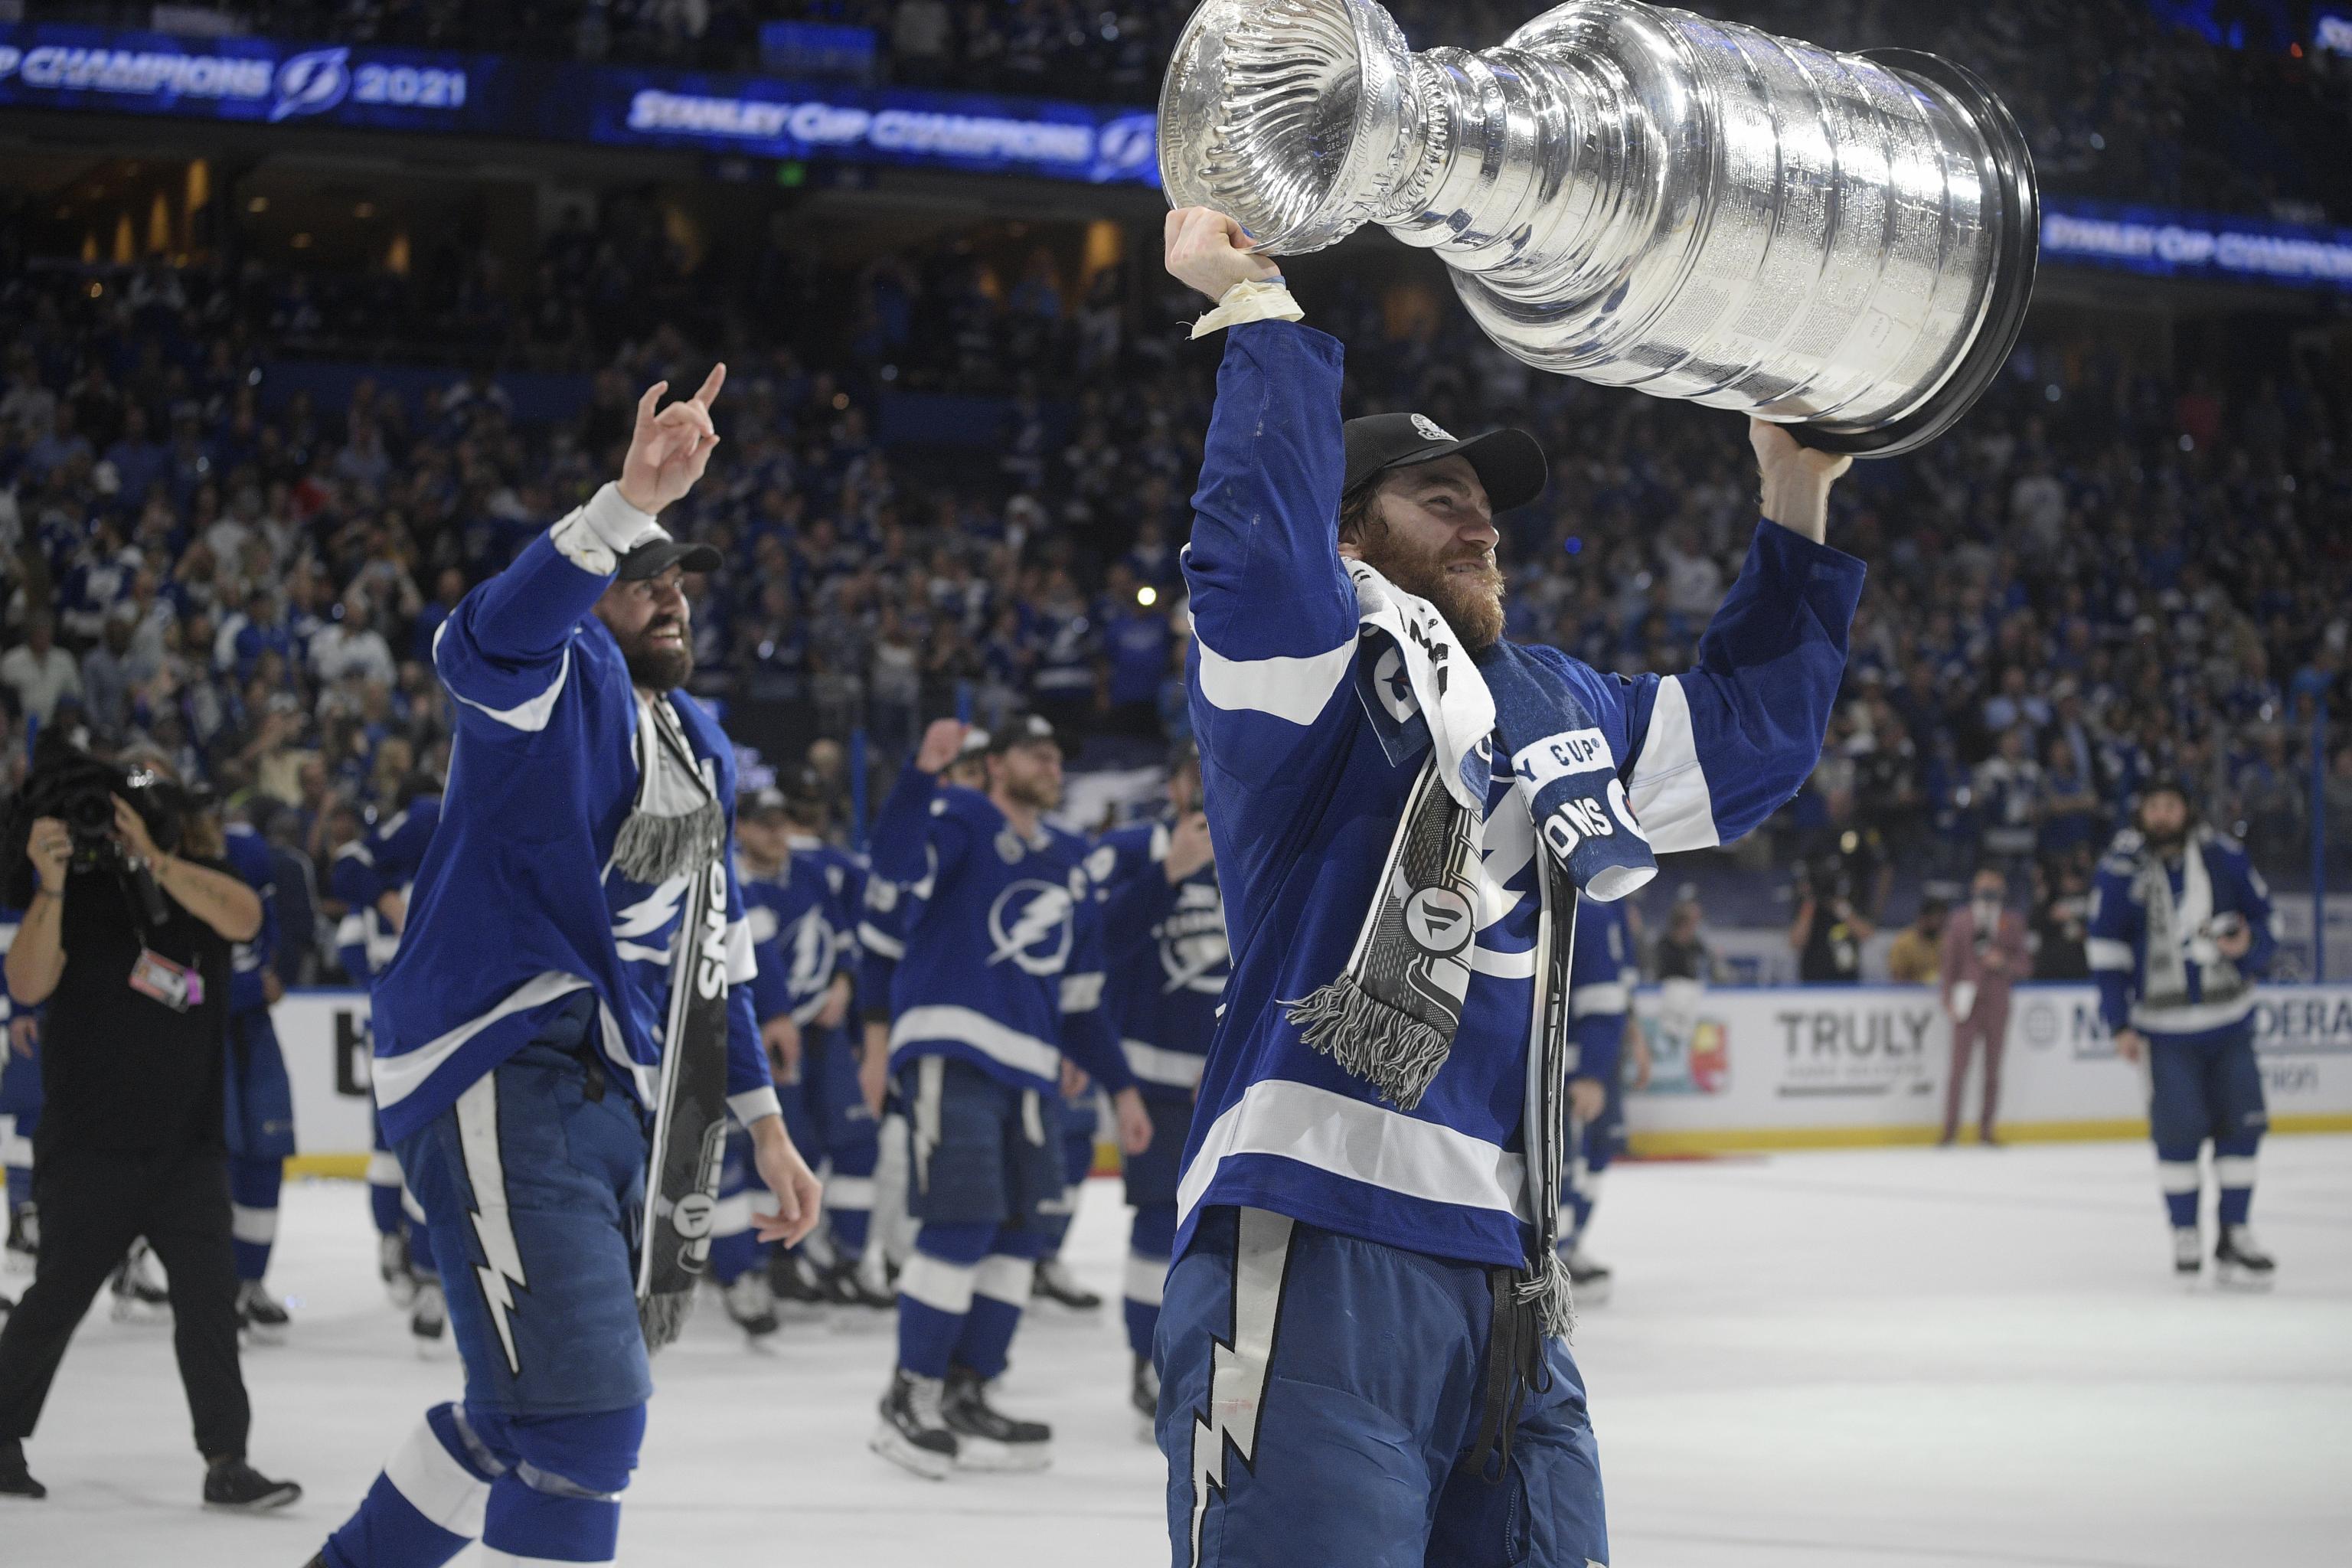 Stanley Cup dented during Tampa Bay Lightning victory boat party